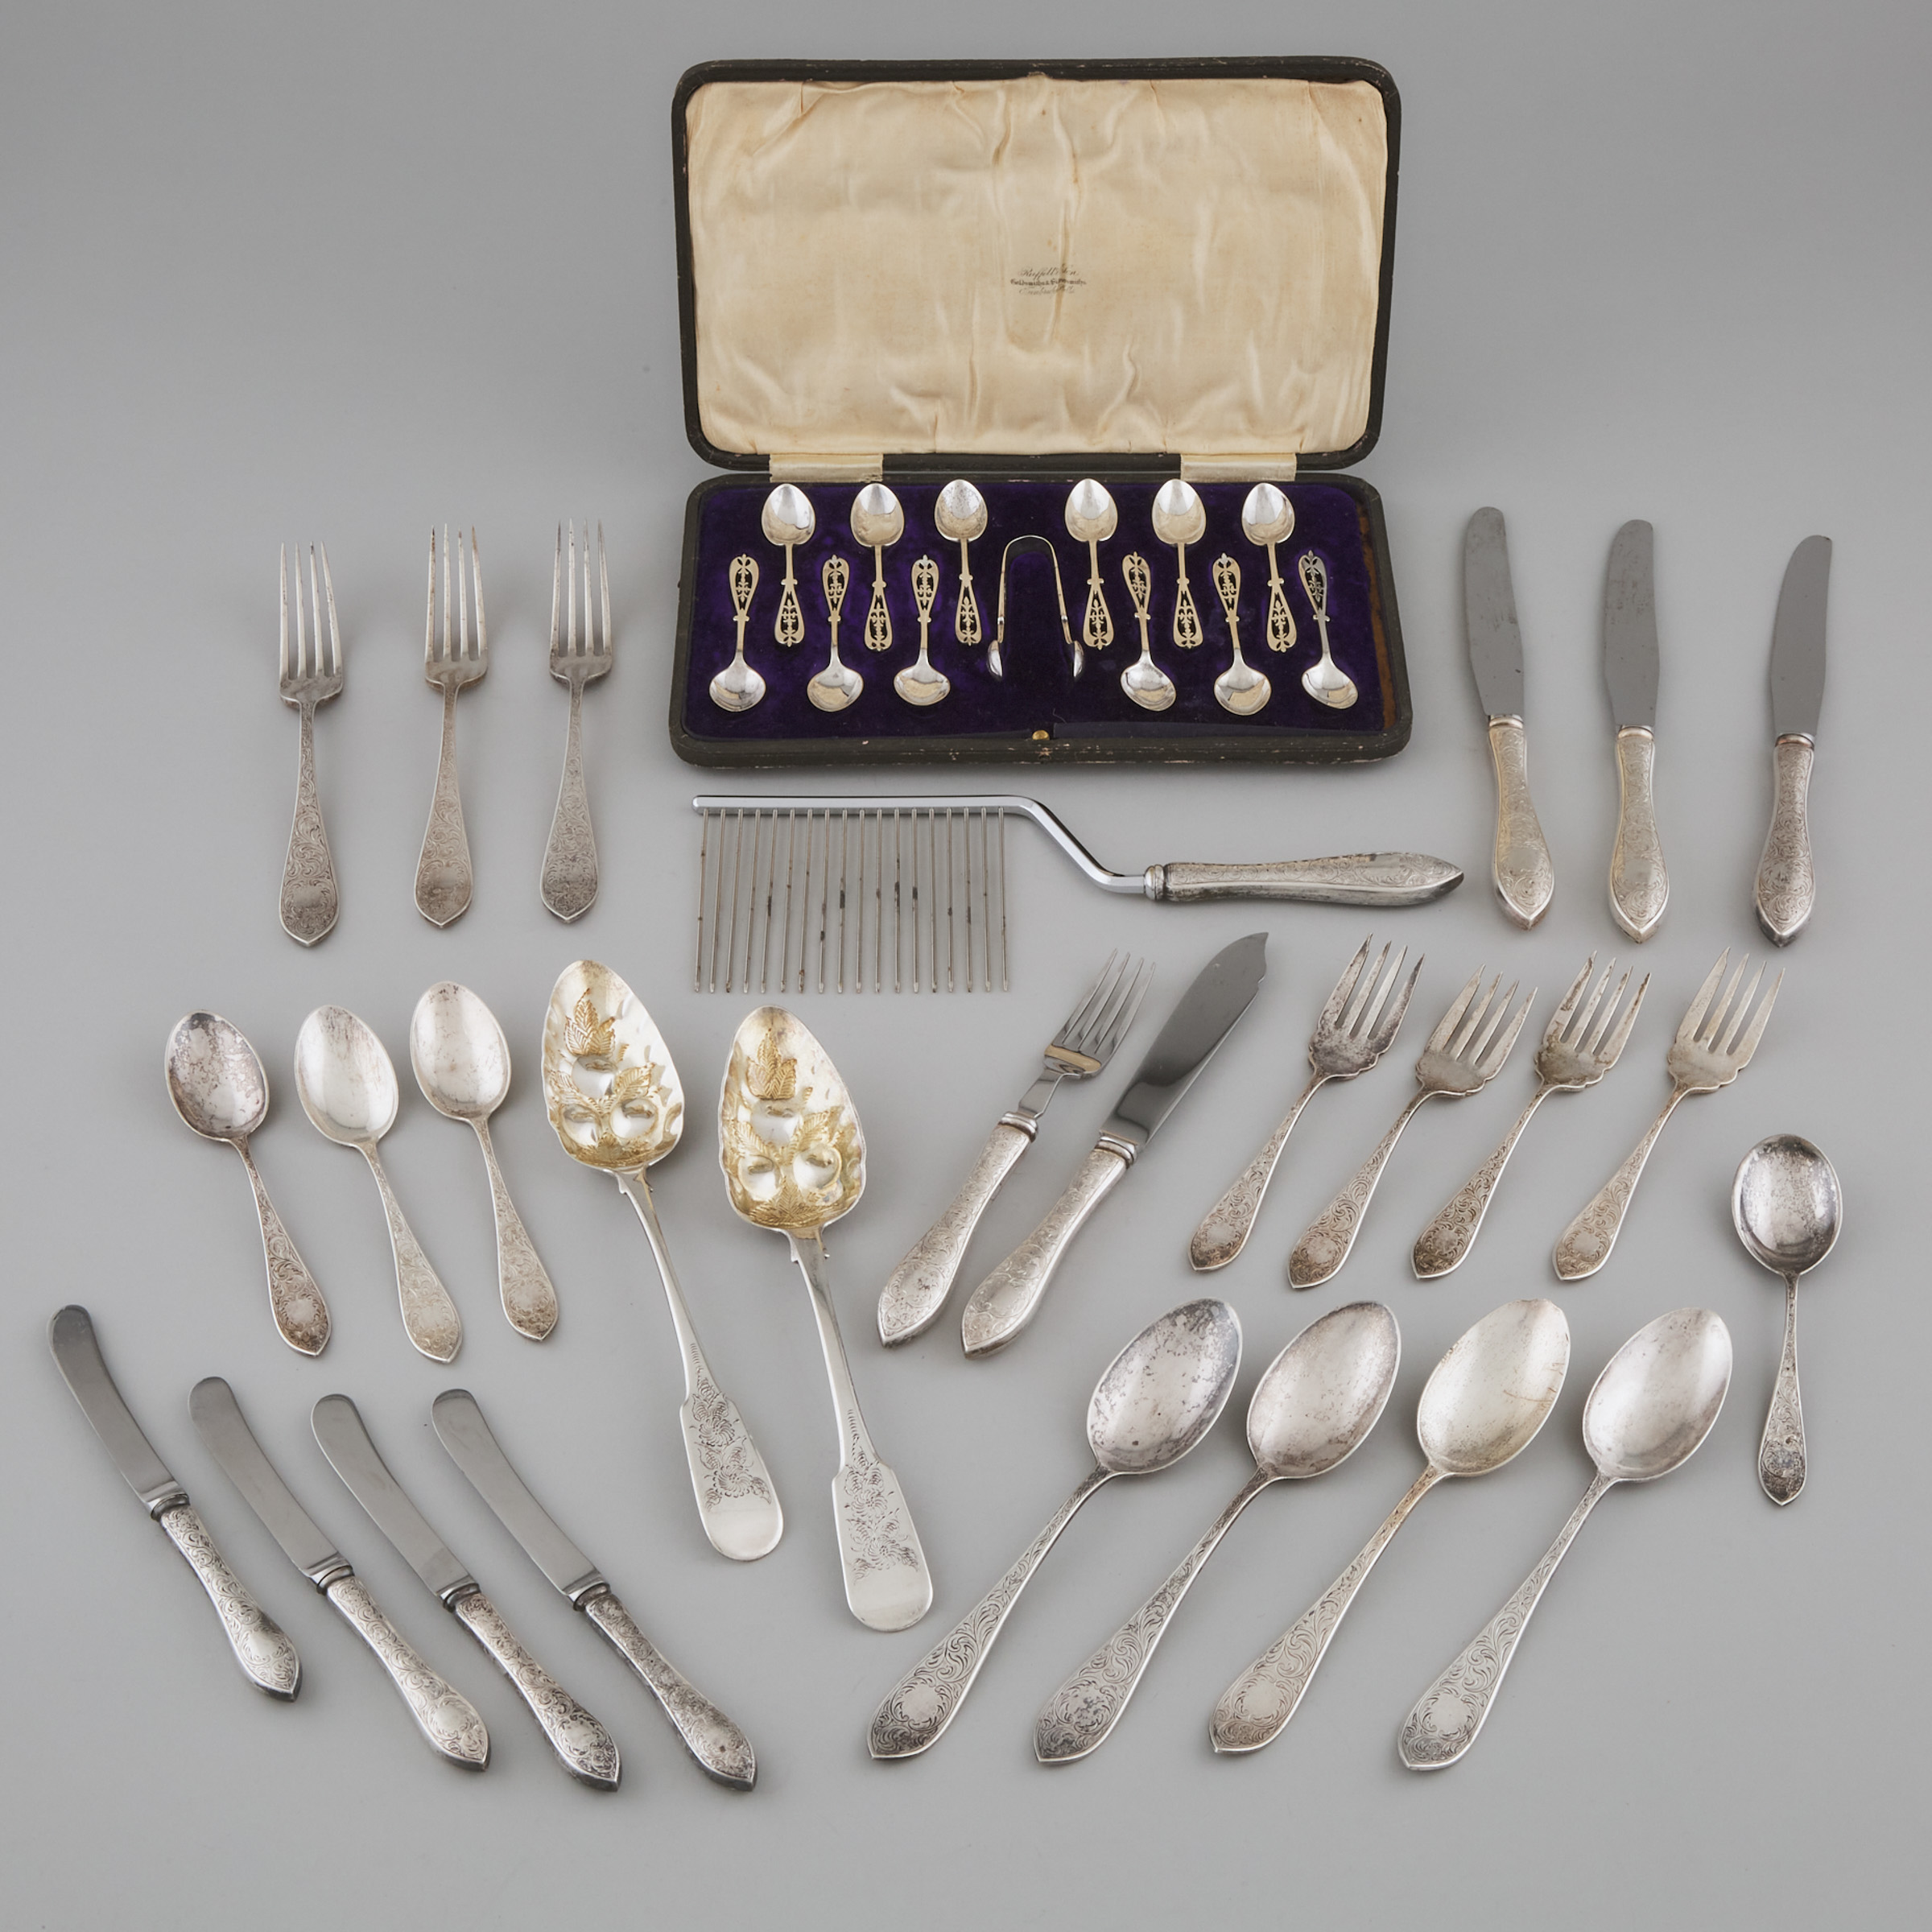 Group of North American and English Silver Flatware, 19th/20th century